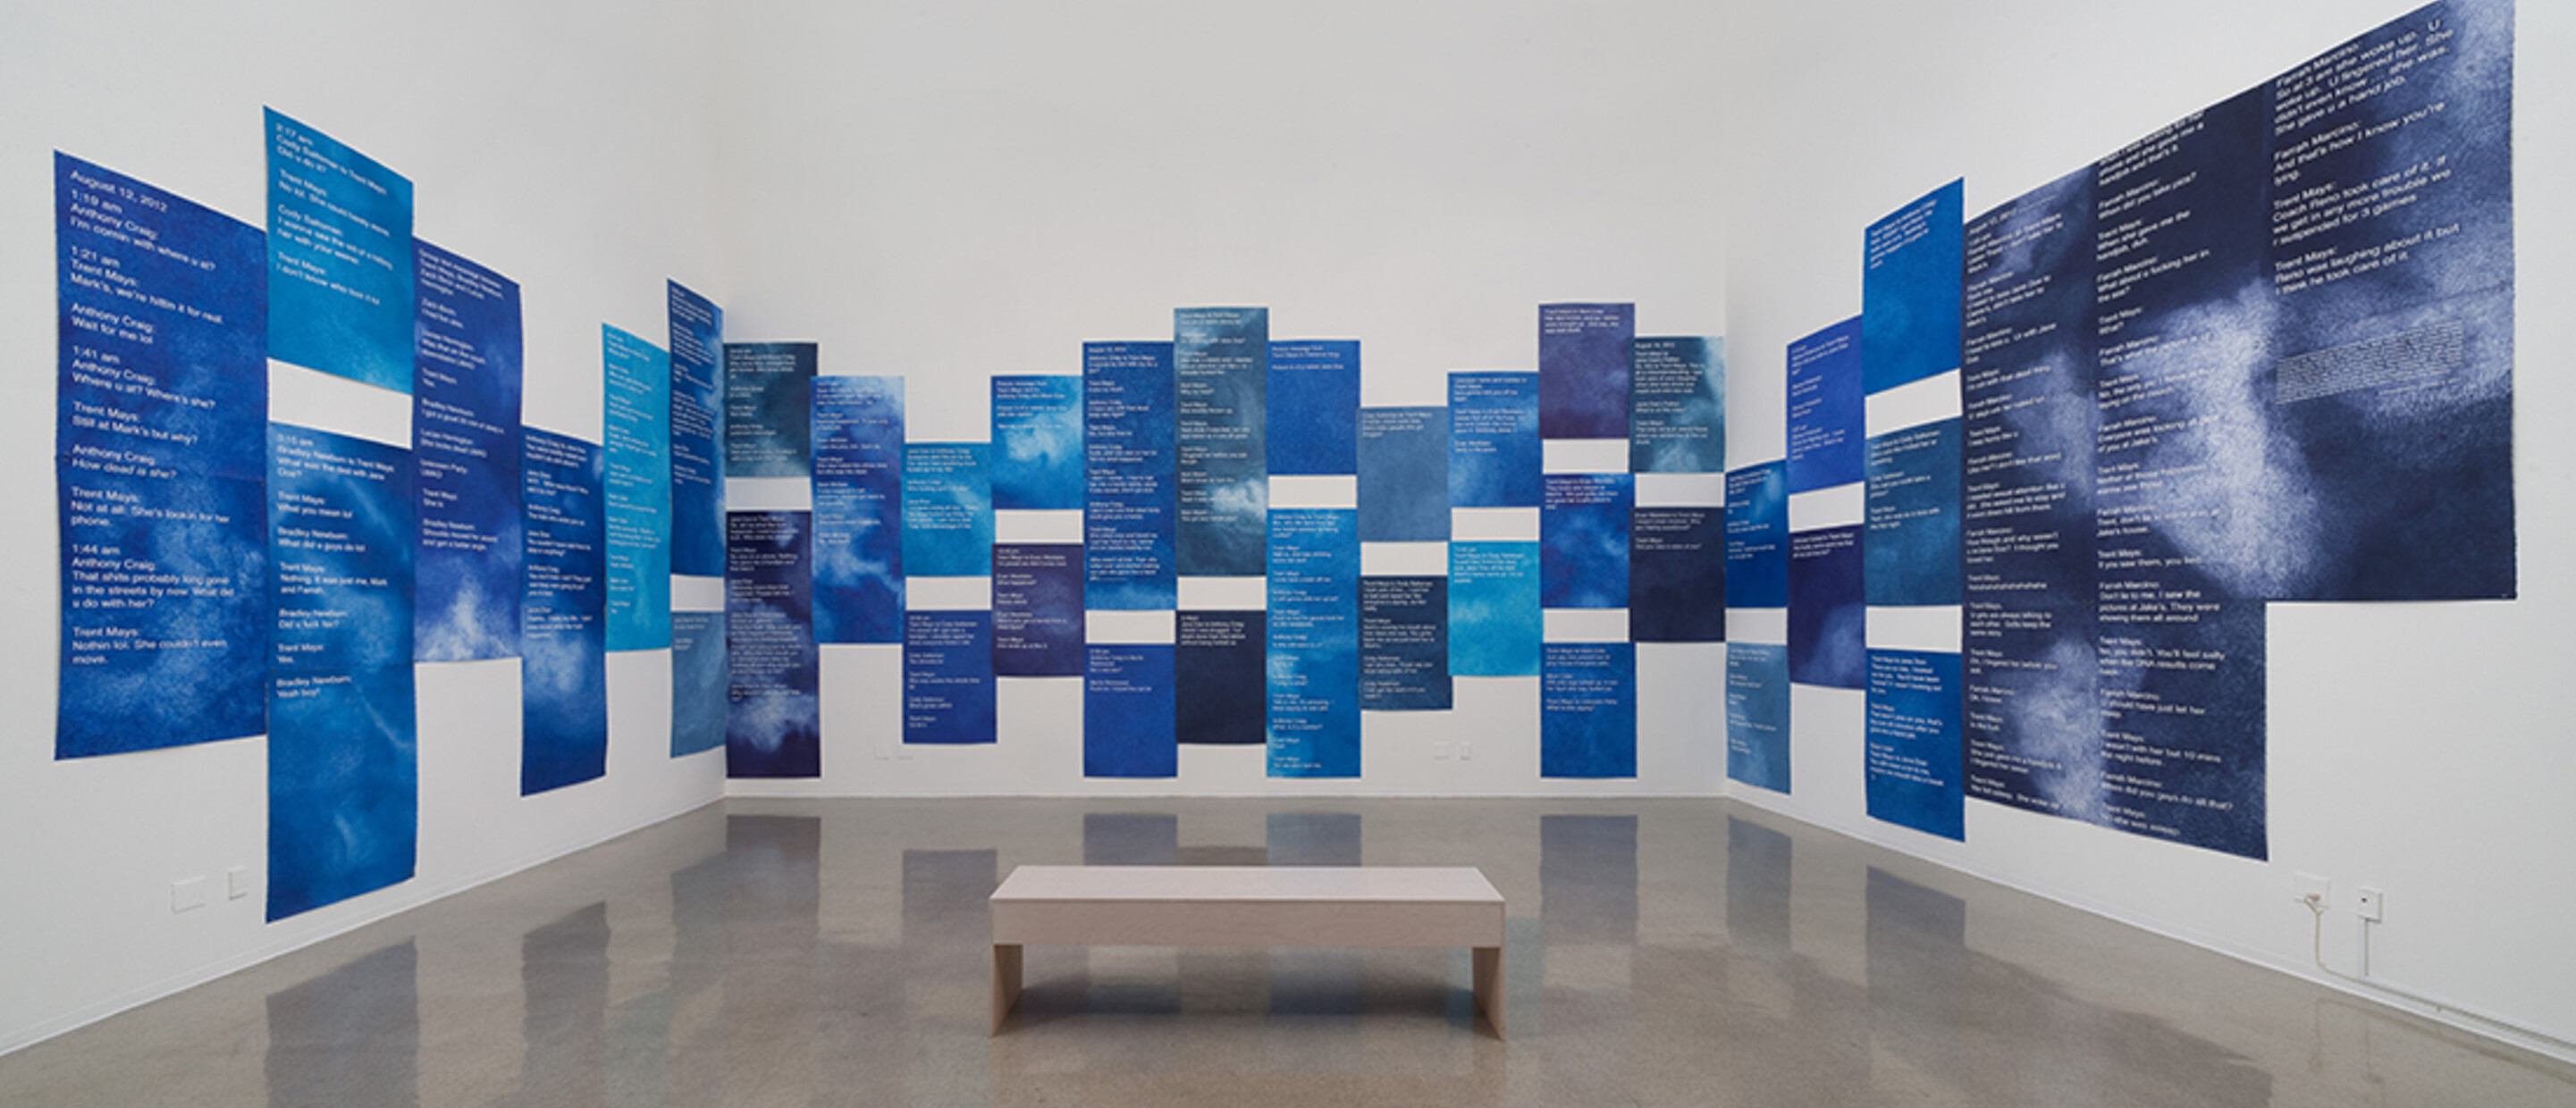 Andrea Bowers. Installation view and detail of Courtroom Drawings (Steubenville Rape Case, Text Messages Entered As Evidence, 2013), 2014 from Andrea Bowers: #sweetjane, at The Pomona College Museum of Art, Claremont CA, January 21 - Apr